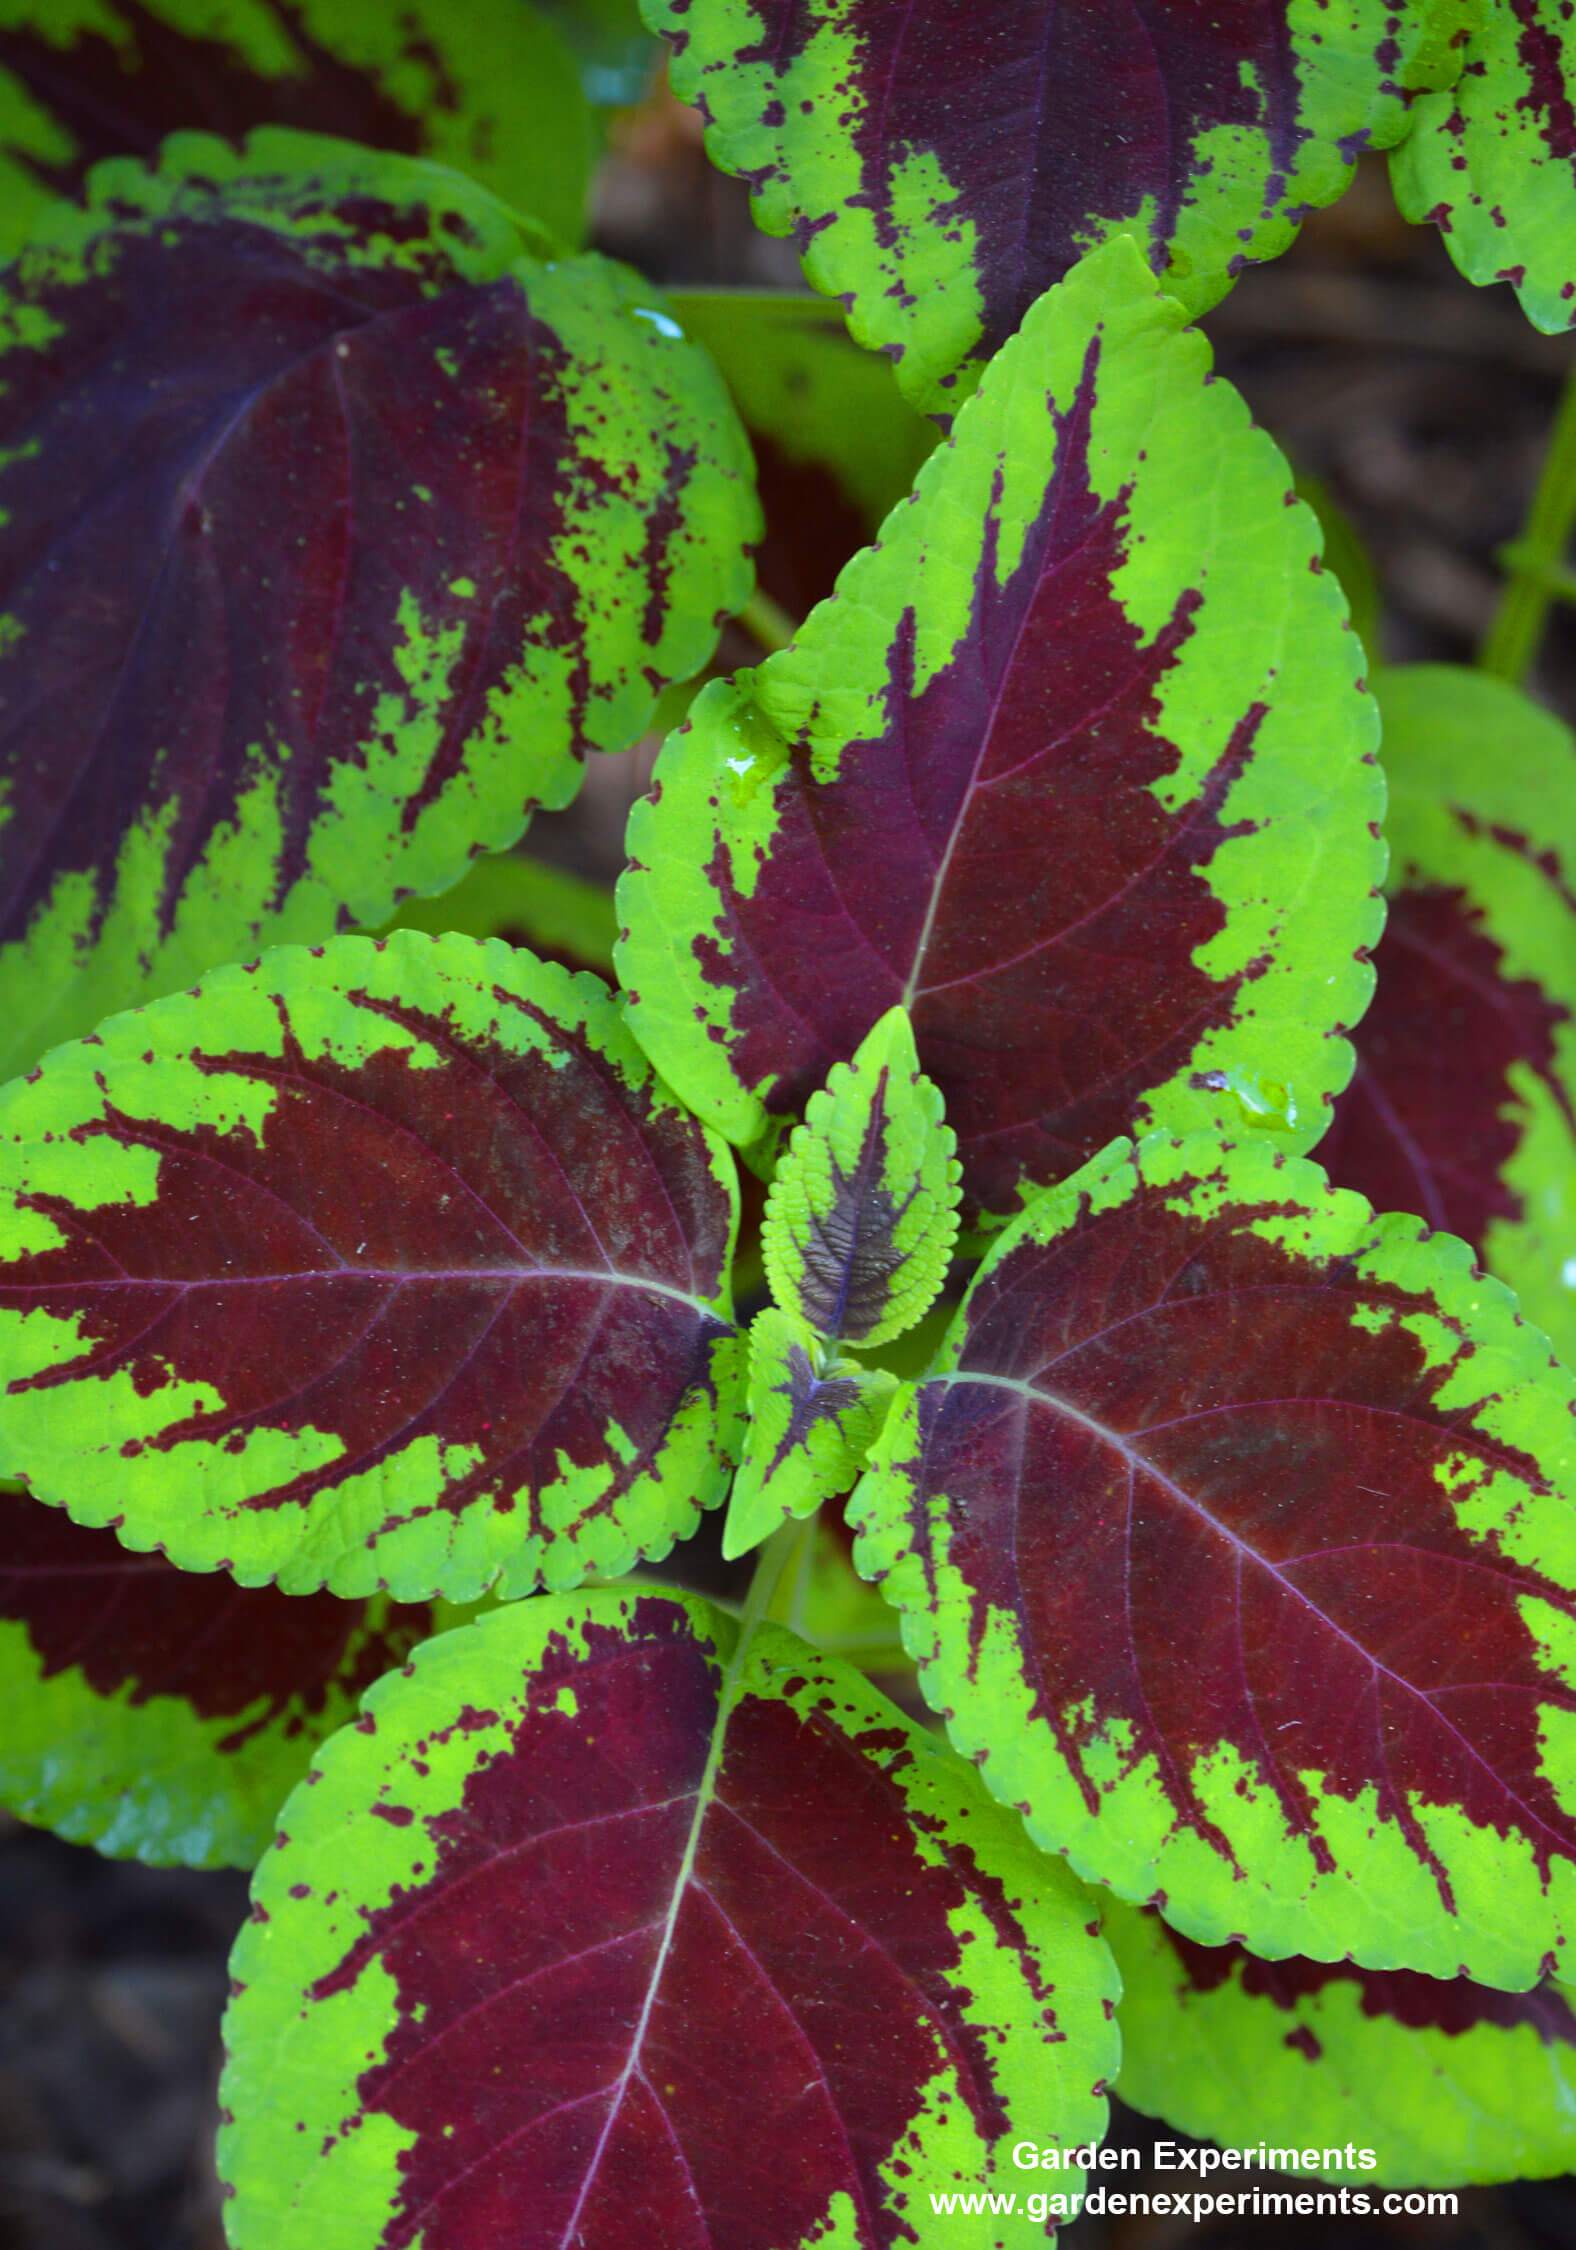 10 Plants for Shade Gardens: Plants Grown for Flowers, Leaf Colors ...